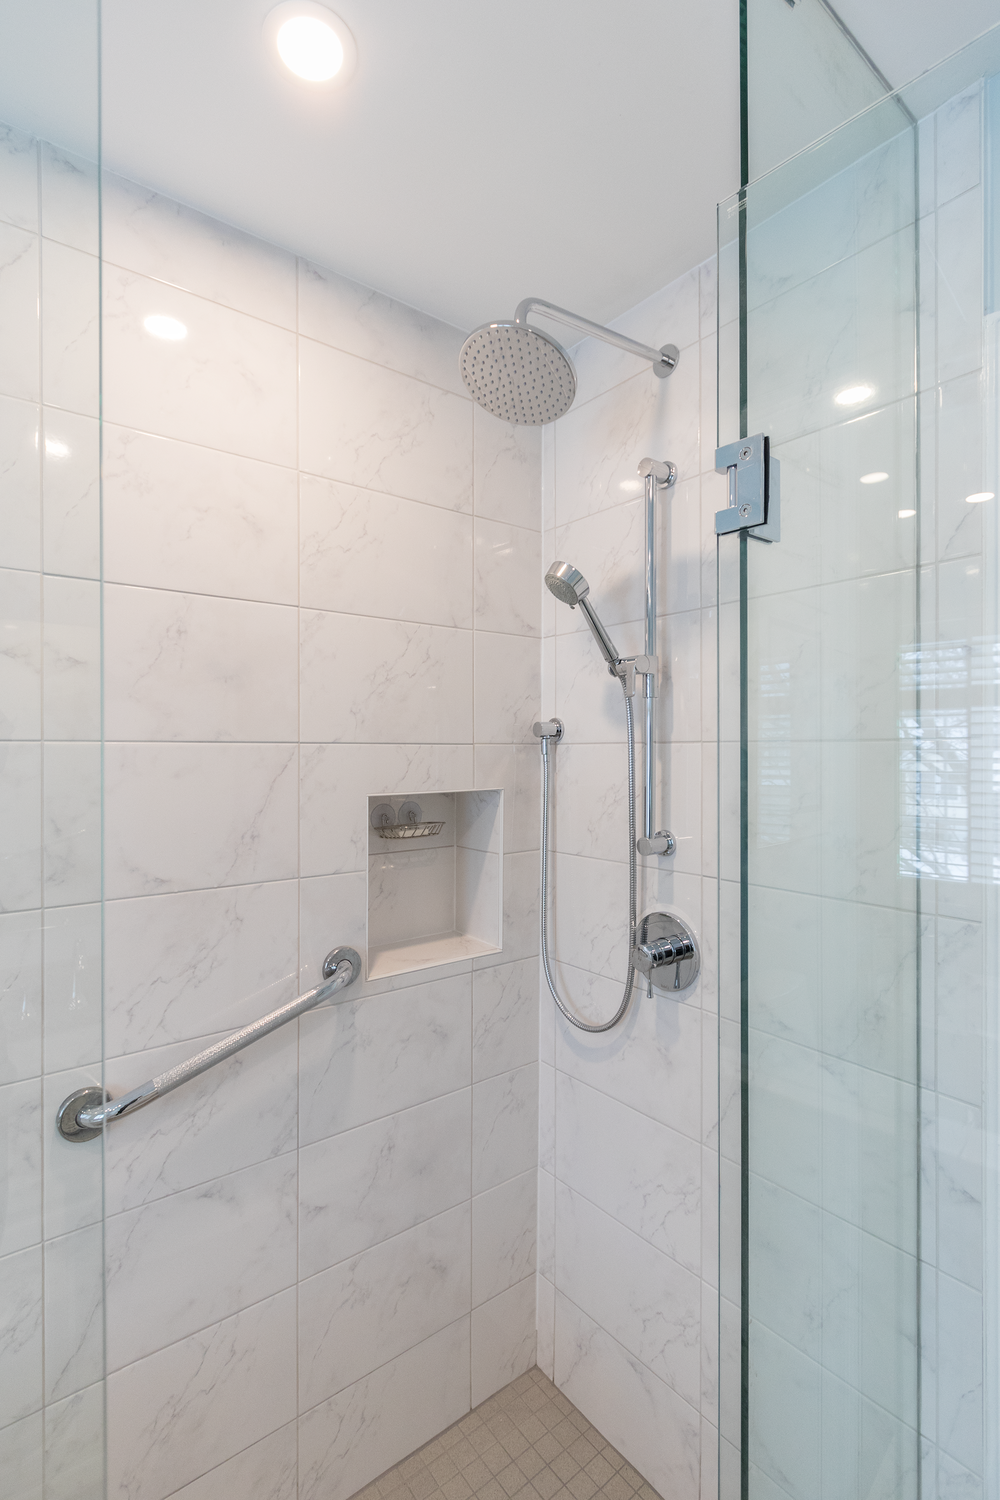 How to Install a Shower Enclosure 